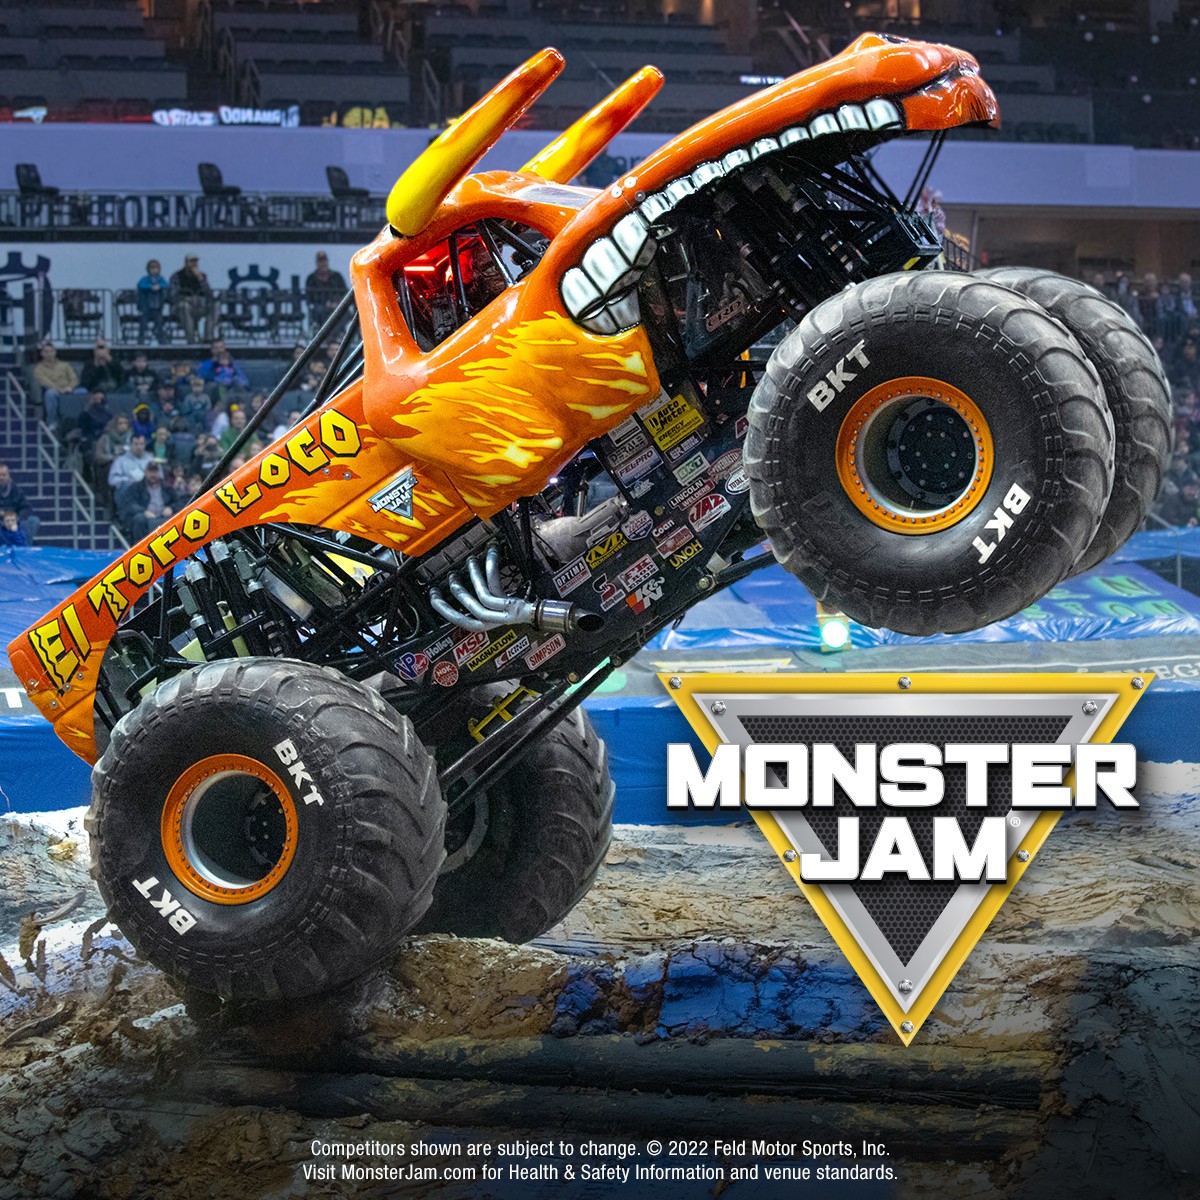 Photo of an orange monster truck, El Toro Loco, on its rear wheels. The Monster Jam logo is superimposed in the bottom-right corner of the image.